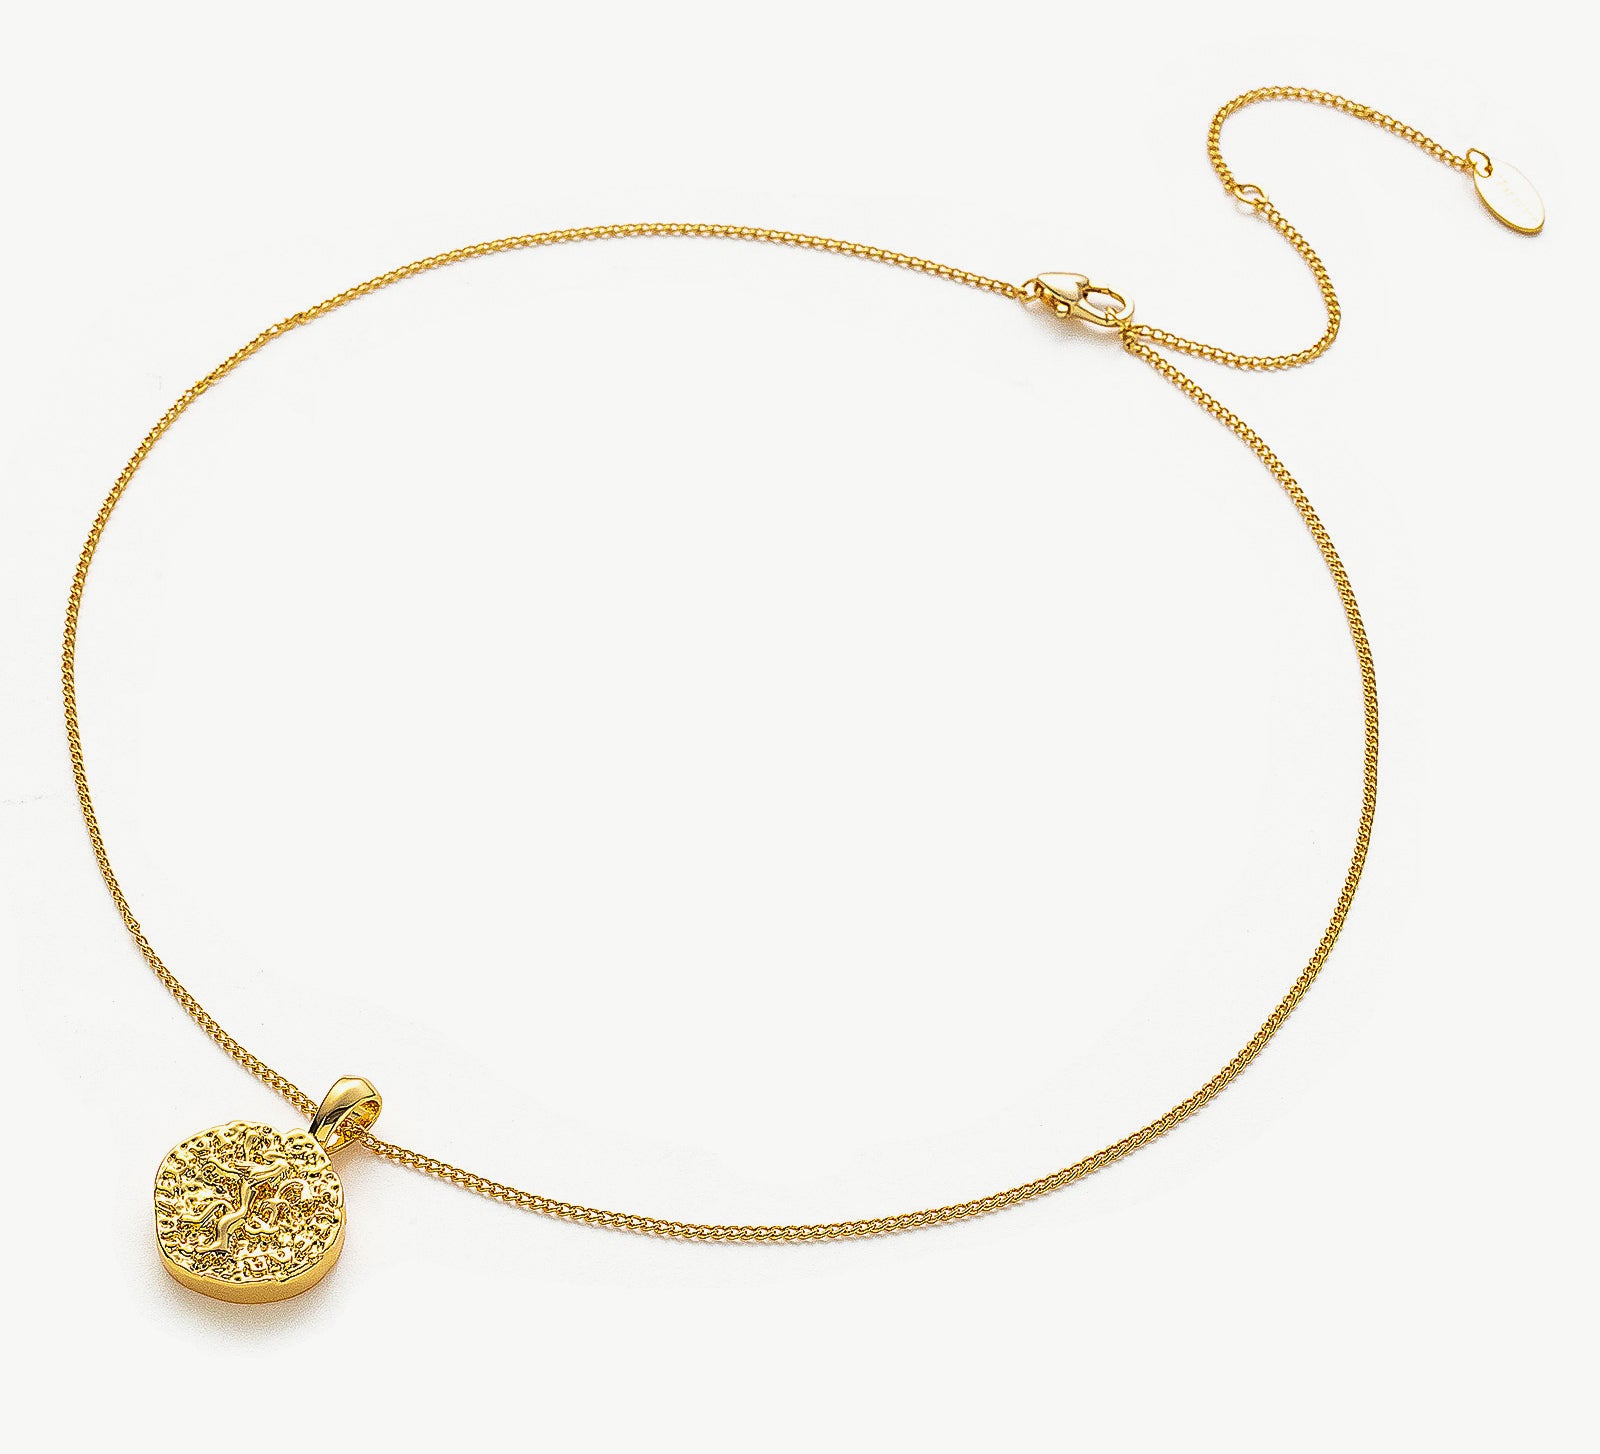 Stylish Disc Pendant Necklace, showcasing radiant hammered gold, this necklace features a textured disc pendant on a delicate chain, creating a refined and versatile accessory for any occasion